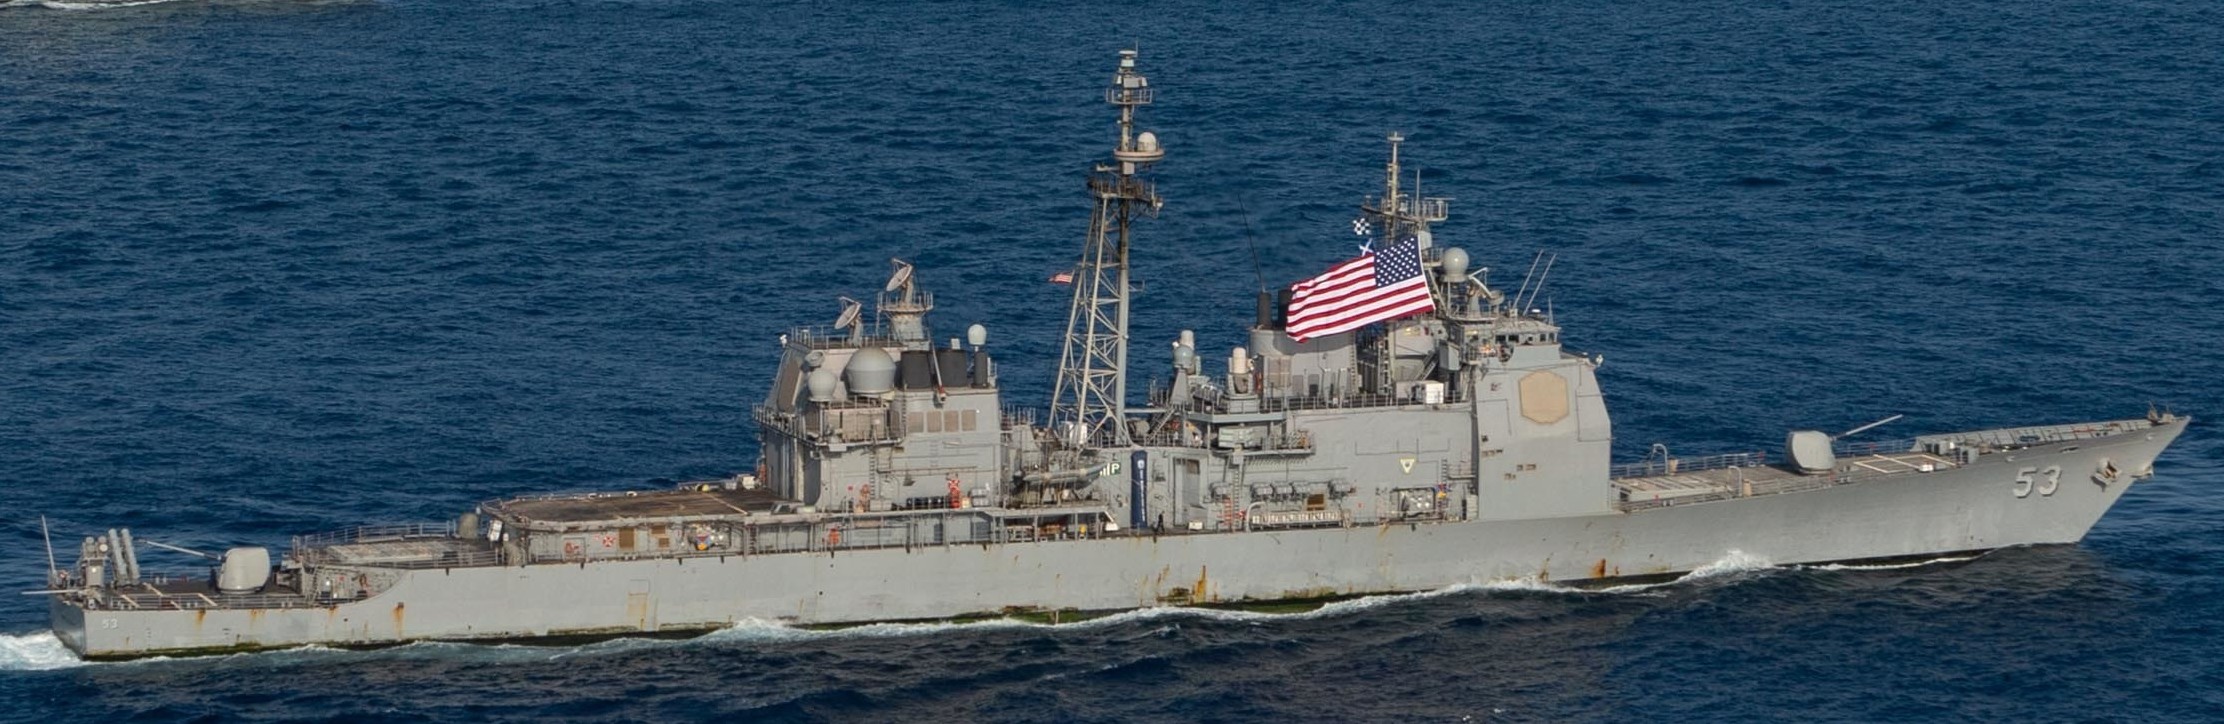 cg-53 uss mobile bay ticonderoga class guided missile cruiser aegis us navy red sea 126